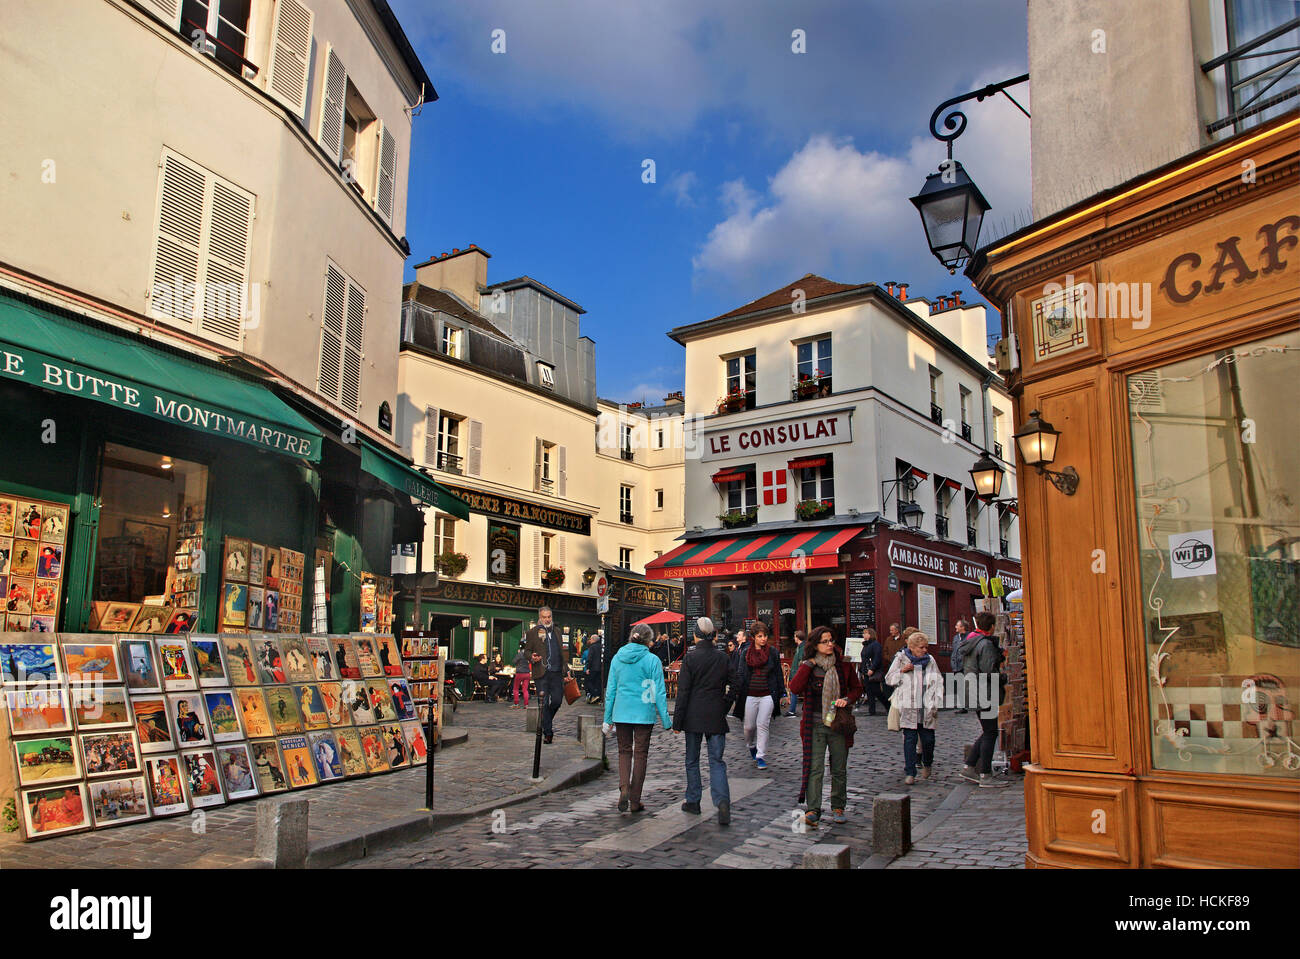 Walking in the picturesque alleys of the "bohemian" neighborhood of Montmartre, Paris, France Stock Photo